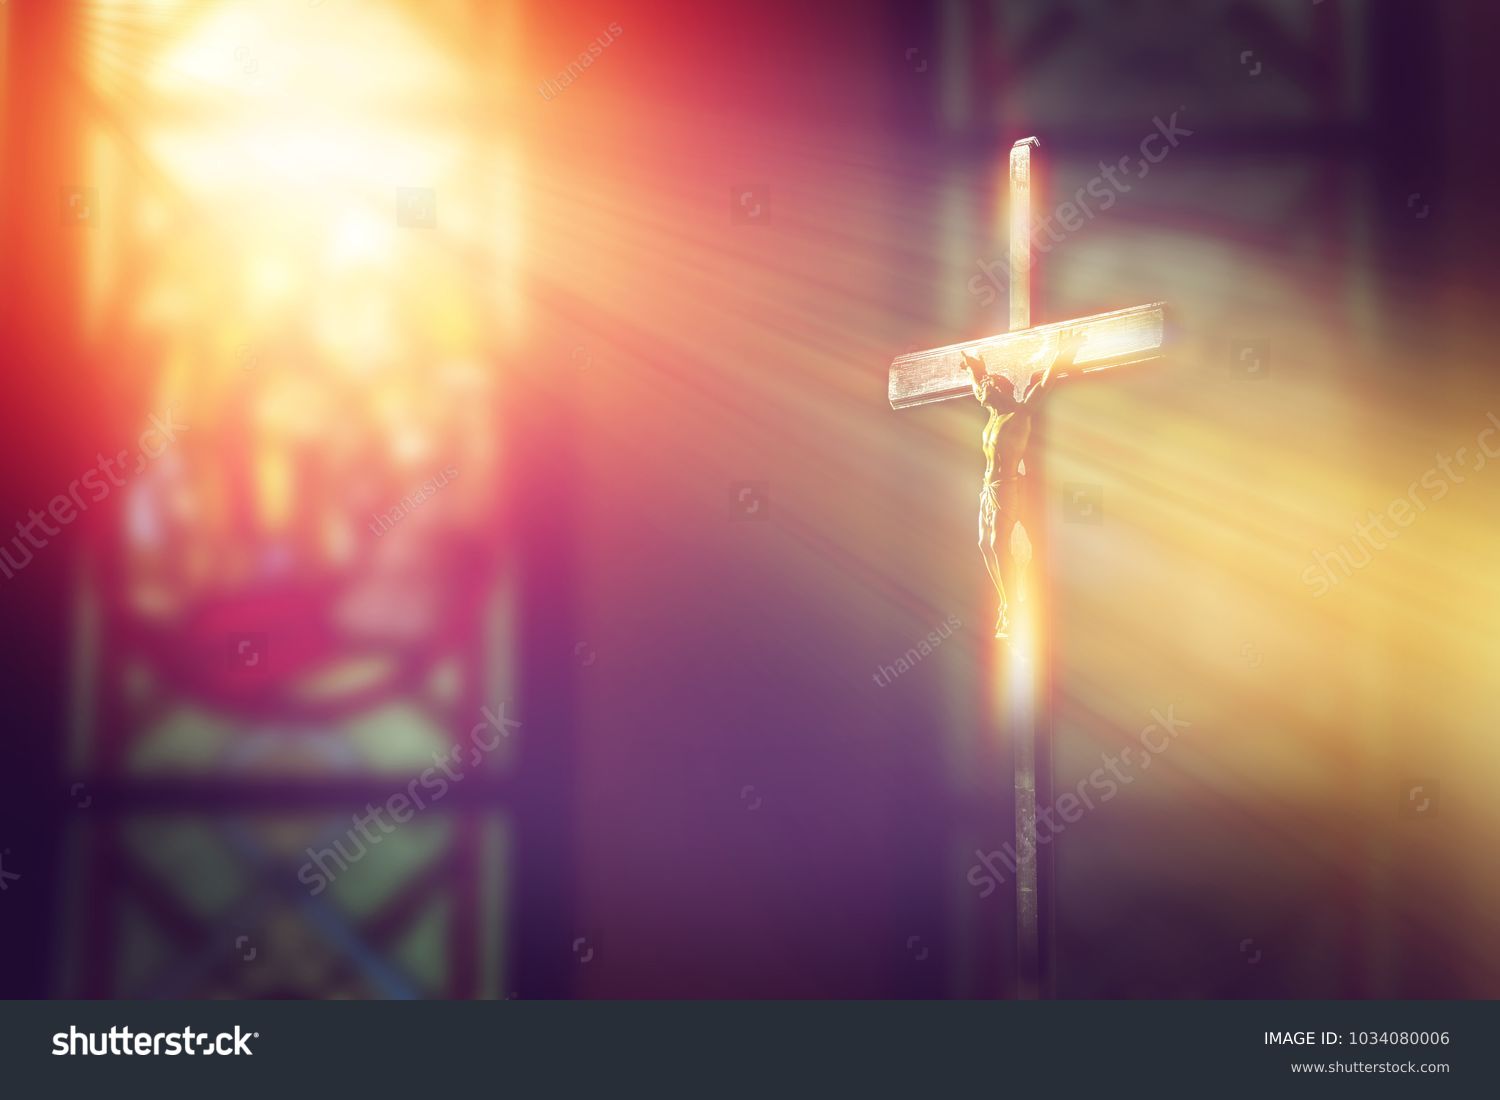 crucifix, jesus on the cross in church with ray of light from stained glass